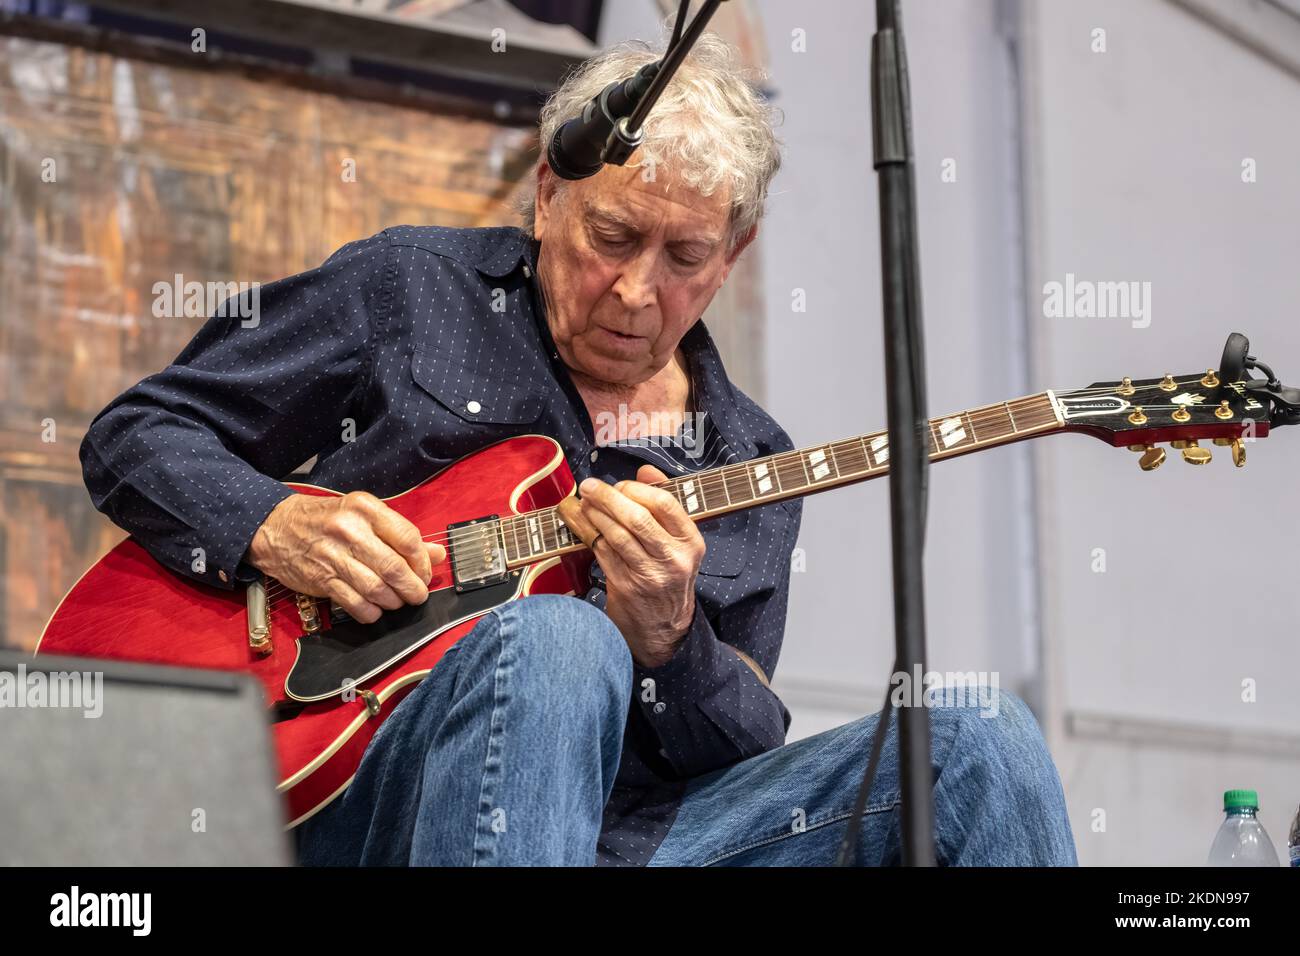 NEW ORLEANS, LA, USA - MAY 4, 2019: Elvin Bishop plays guitar at the Blues Tent at the 2019 New Orleans Jazz and Heritage Festival Stock Photo